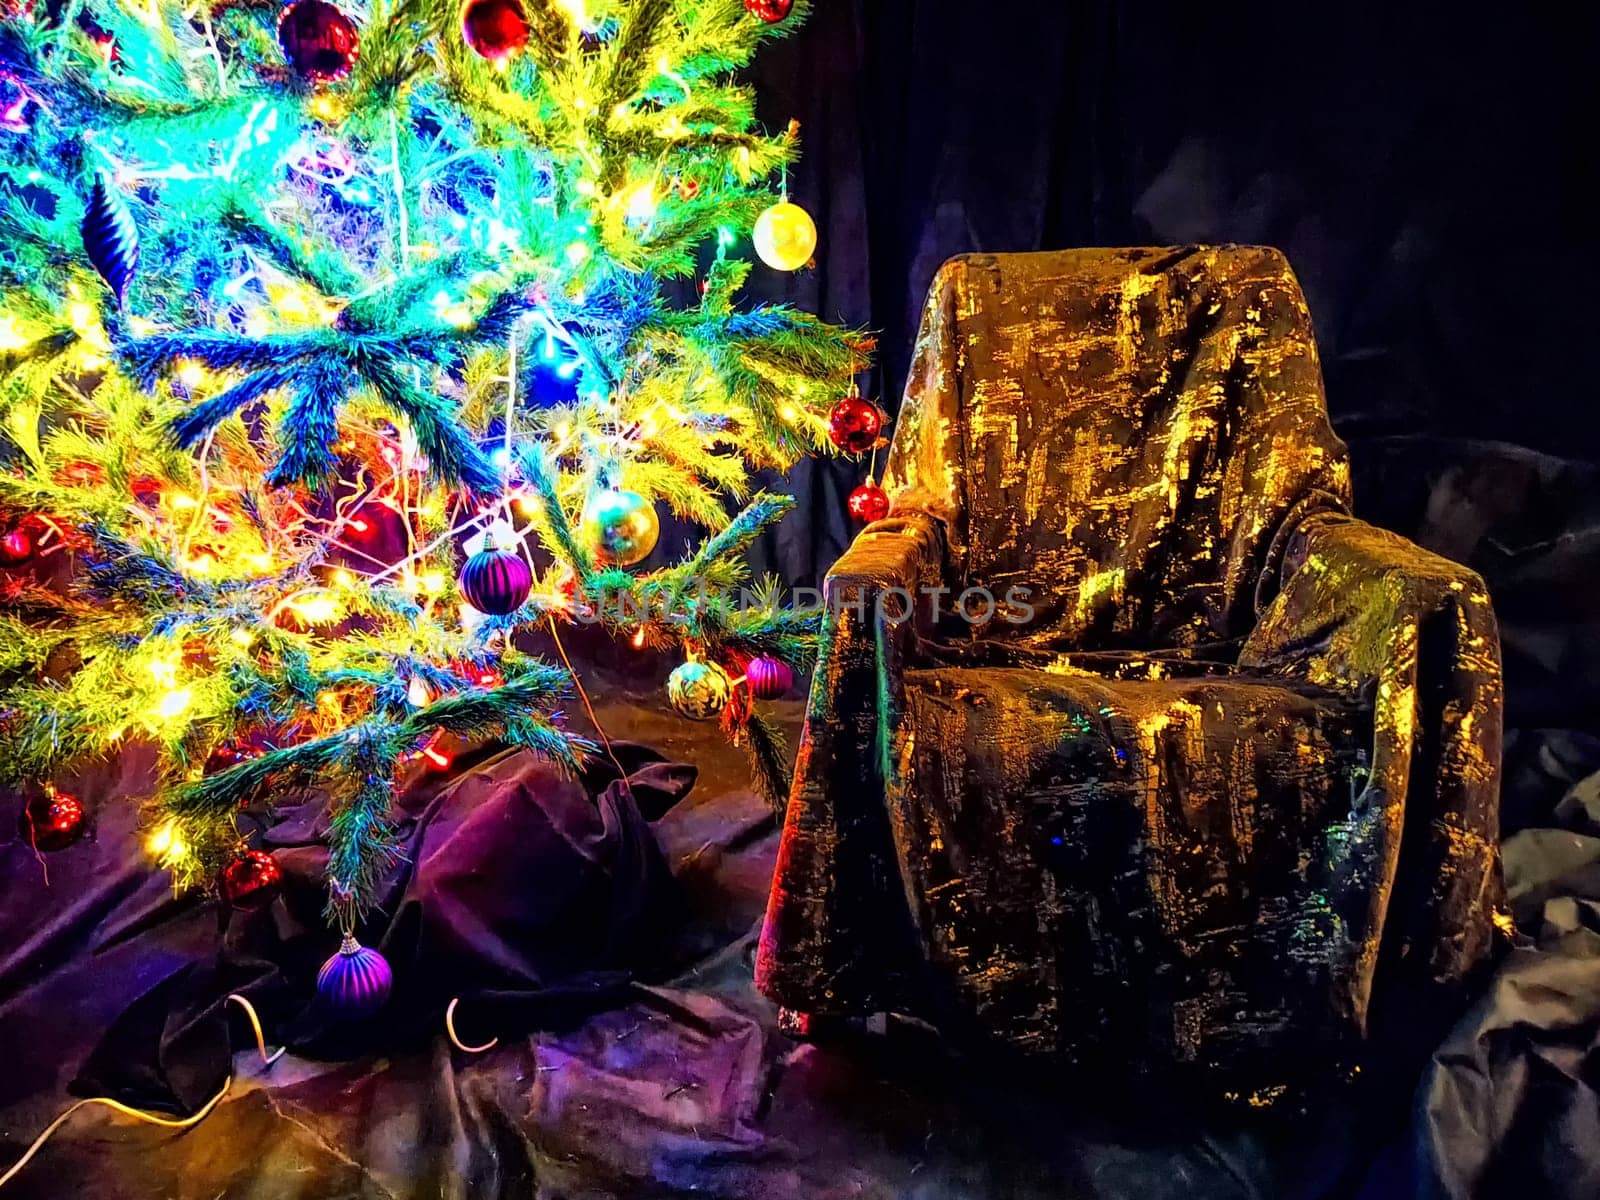 A beautifully decorated Christmas tree next to luxurious chair. Festive Christmas Tree With Illuminated Lights Beside an Ornate Chair